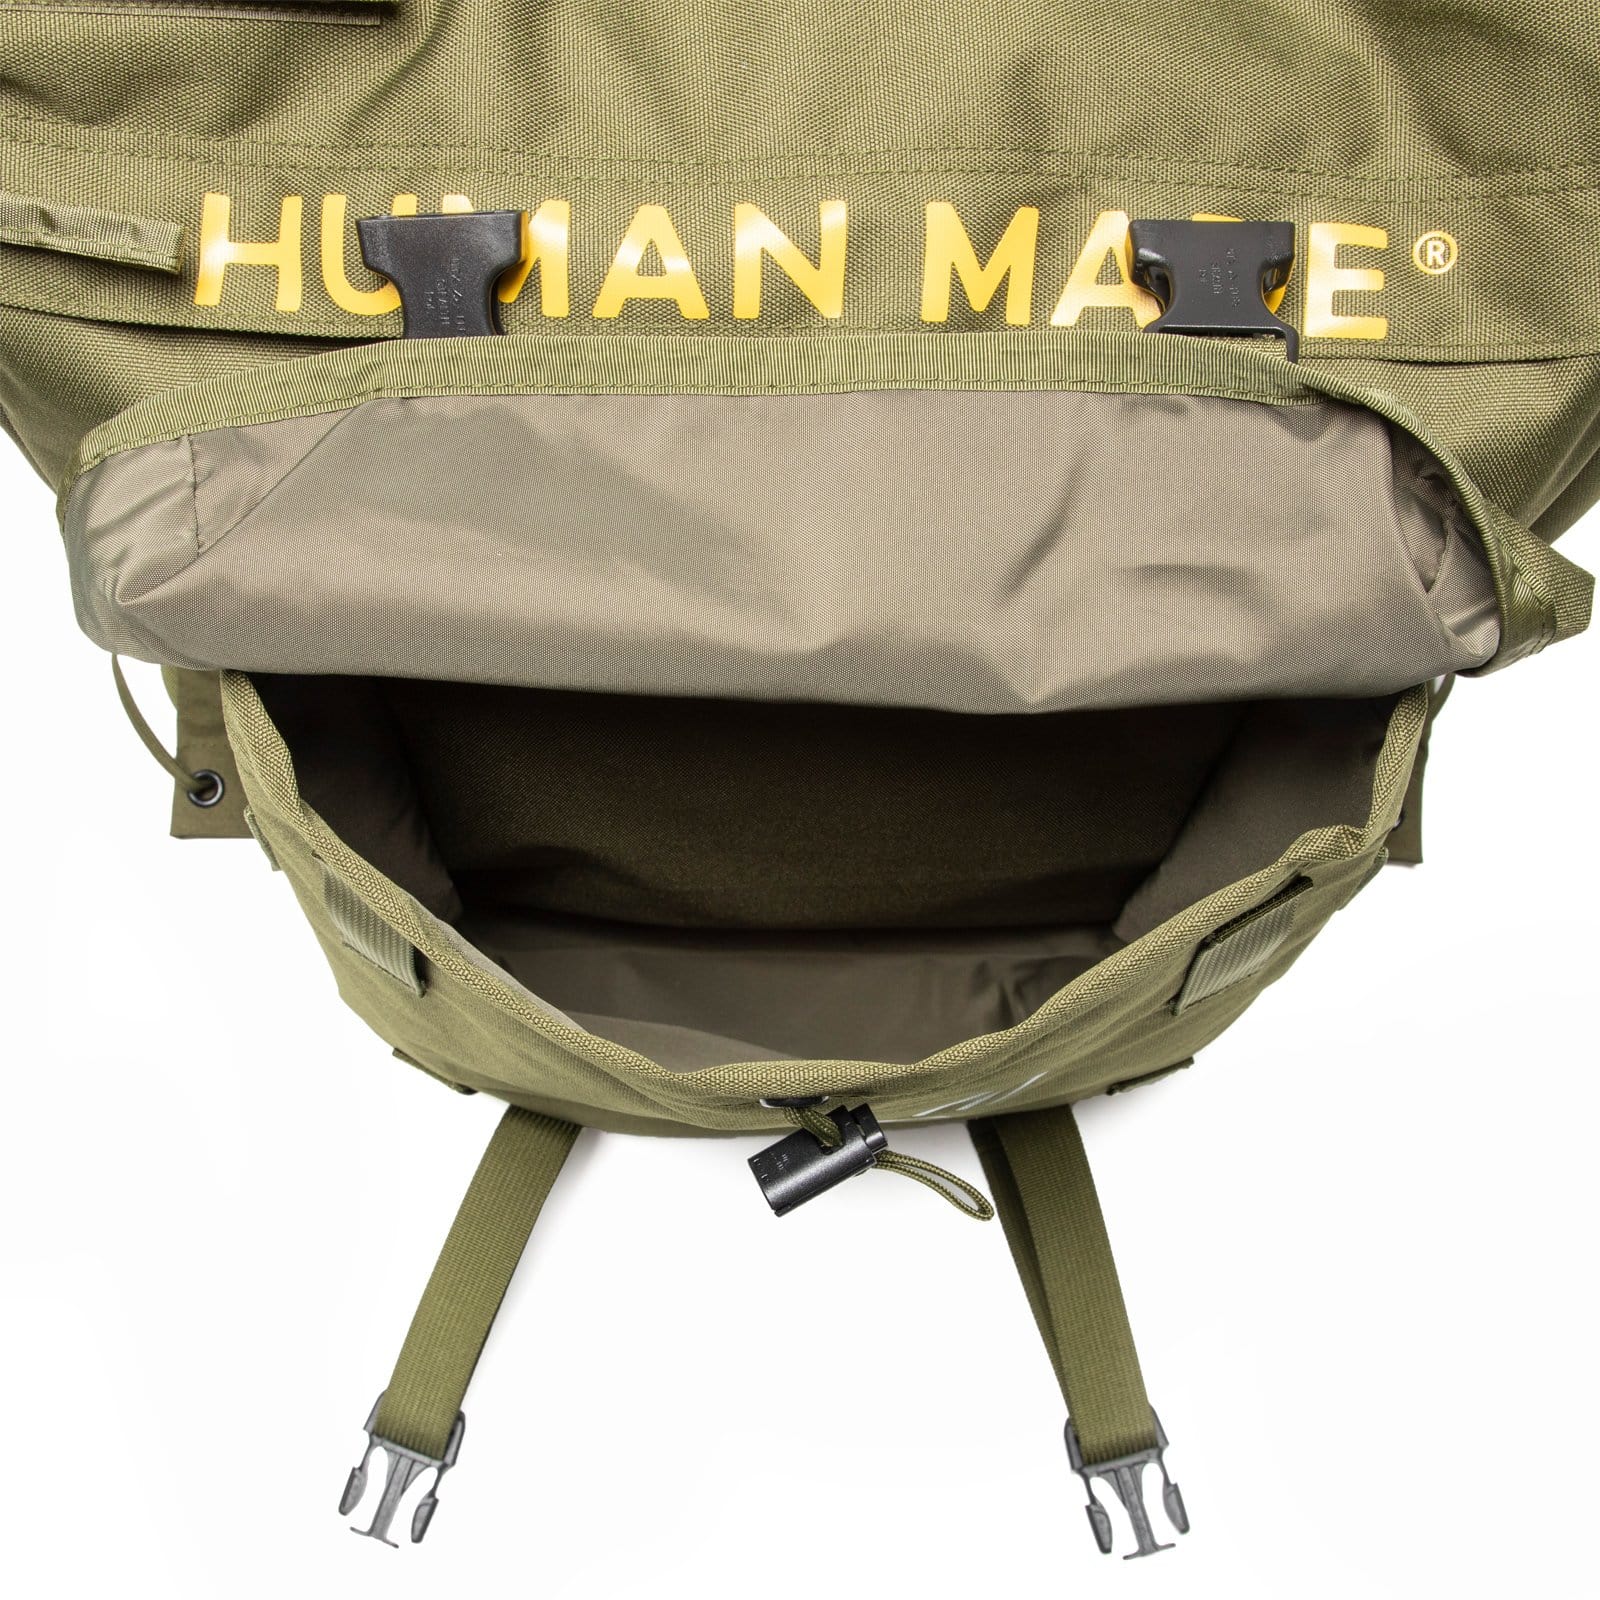 Human Made Bags & Accessories OLIVE DRAB / OS MILITARY RUCKSACK